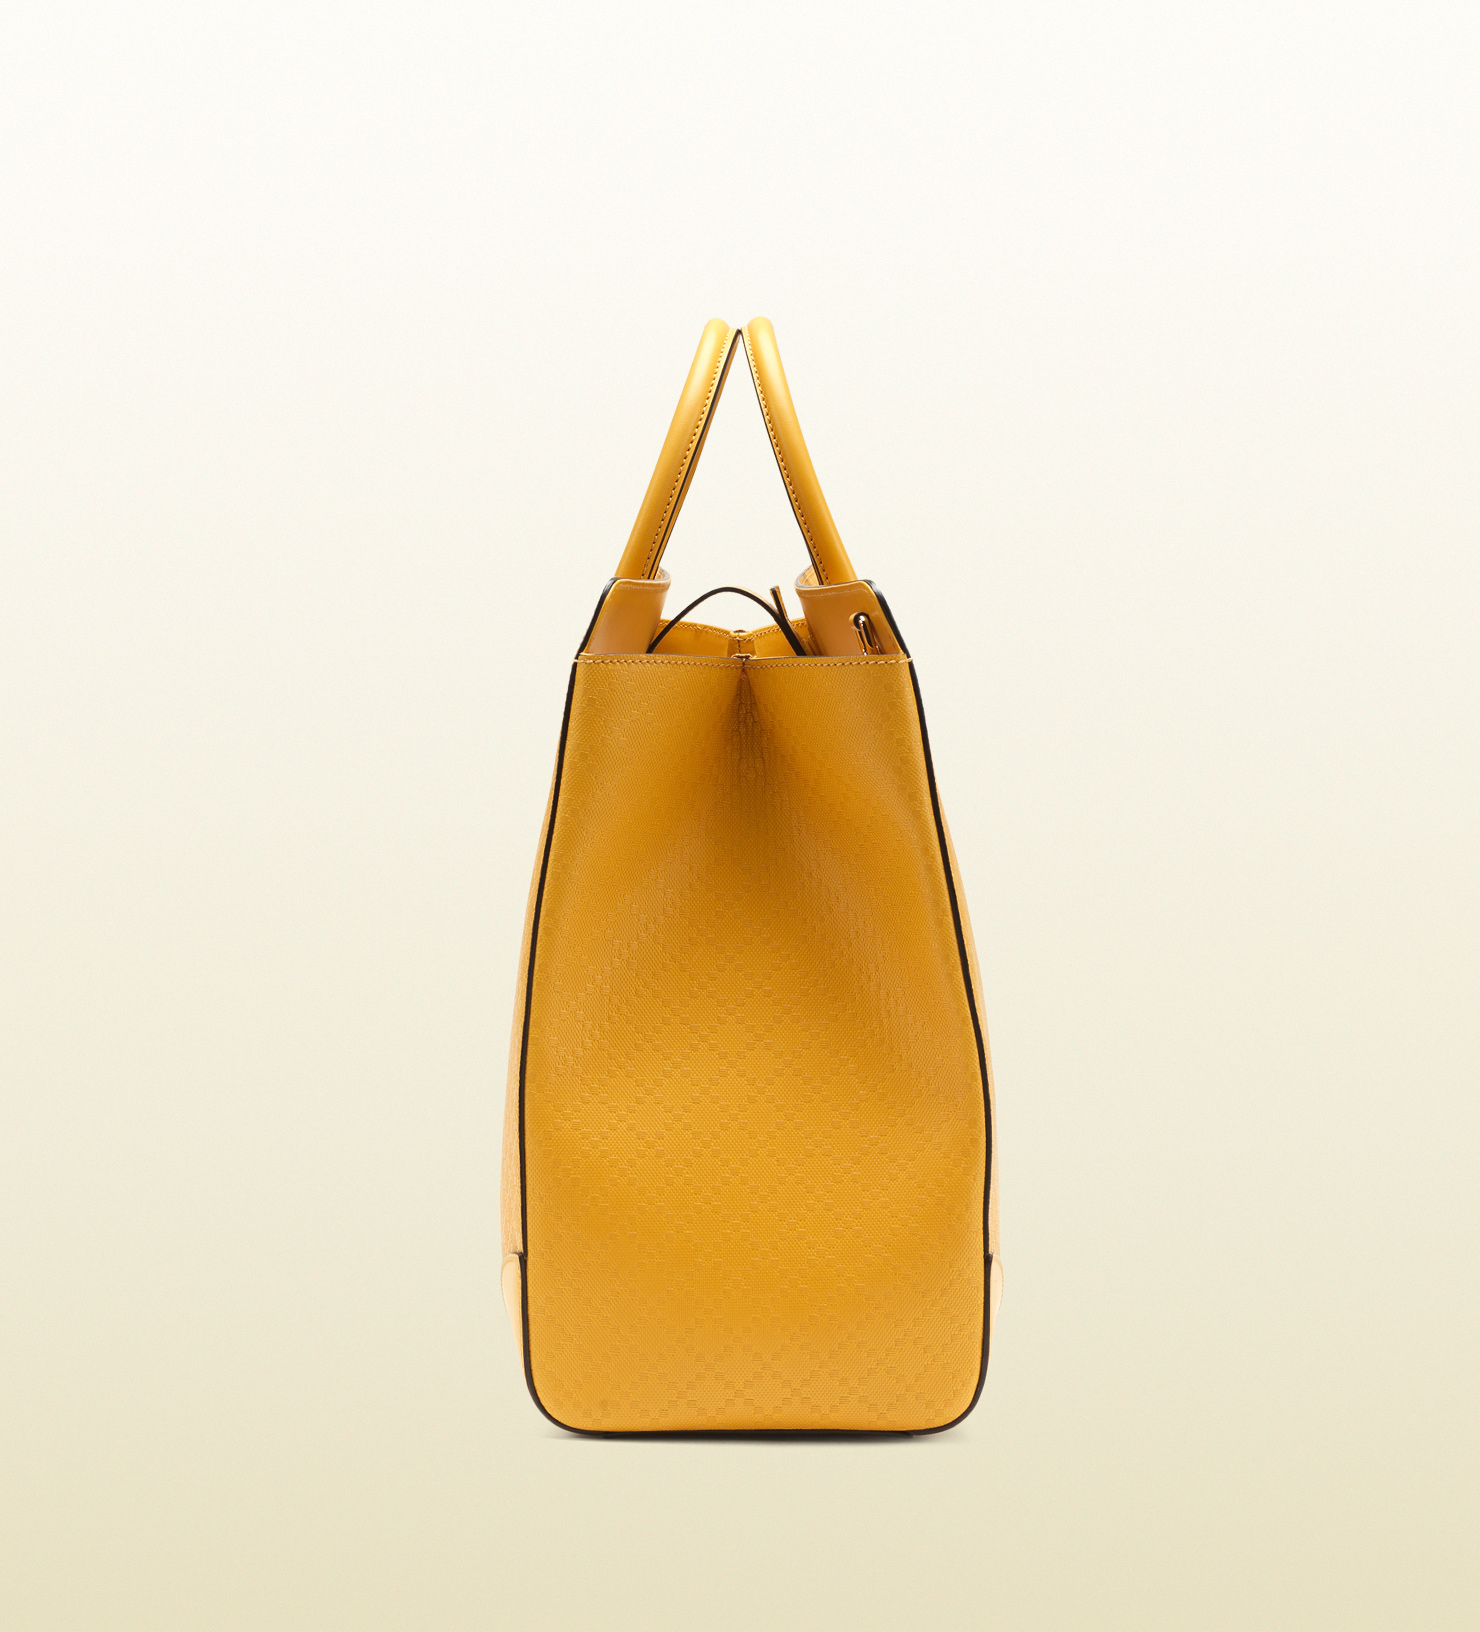 Lyst - Gucci Bright Diamante Leather Top Handle Bag in Yellow